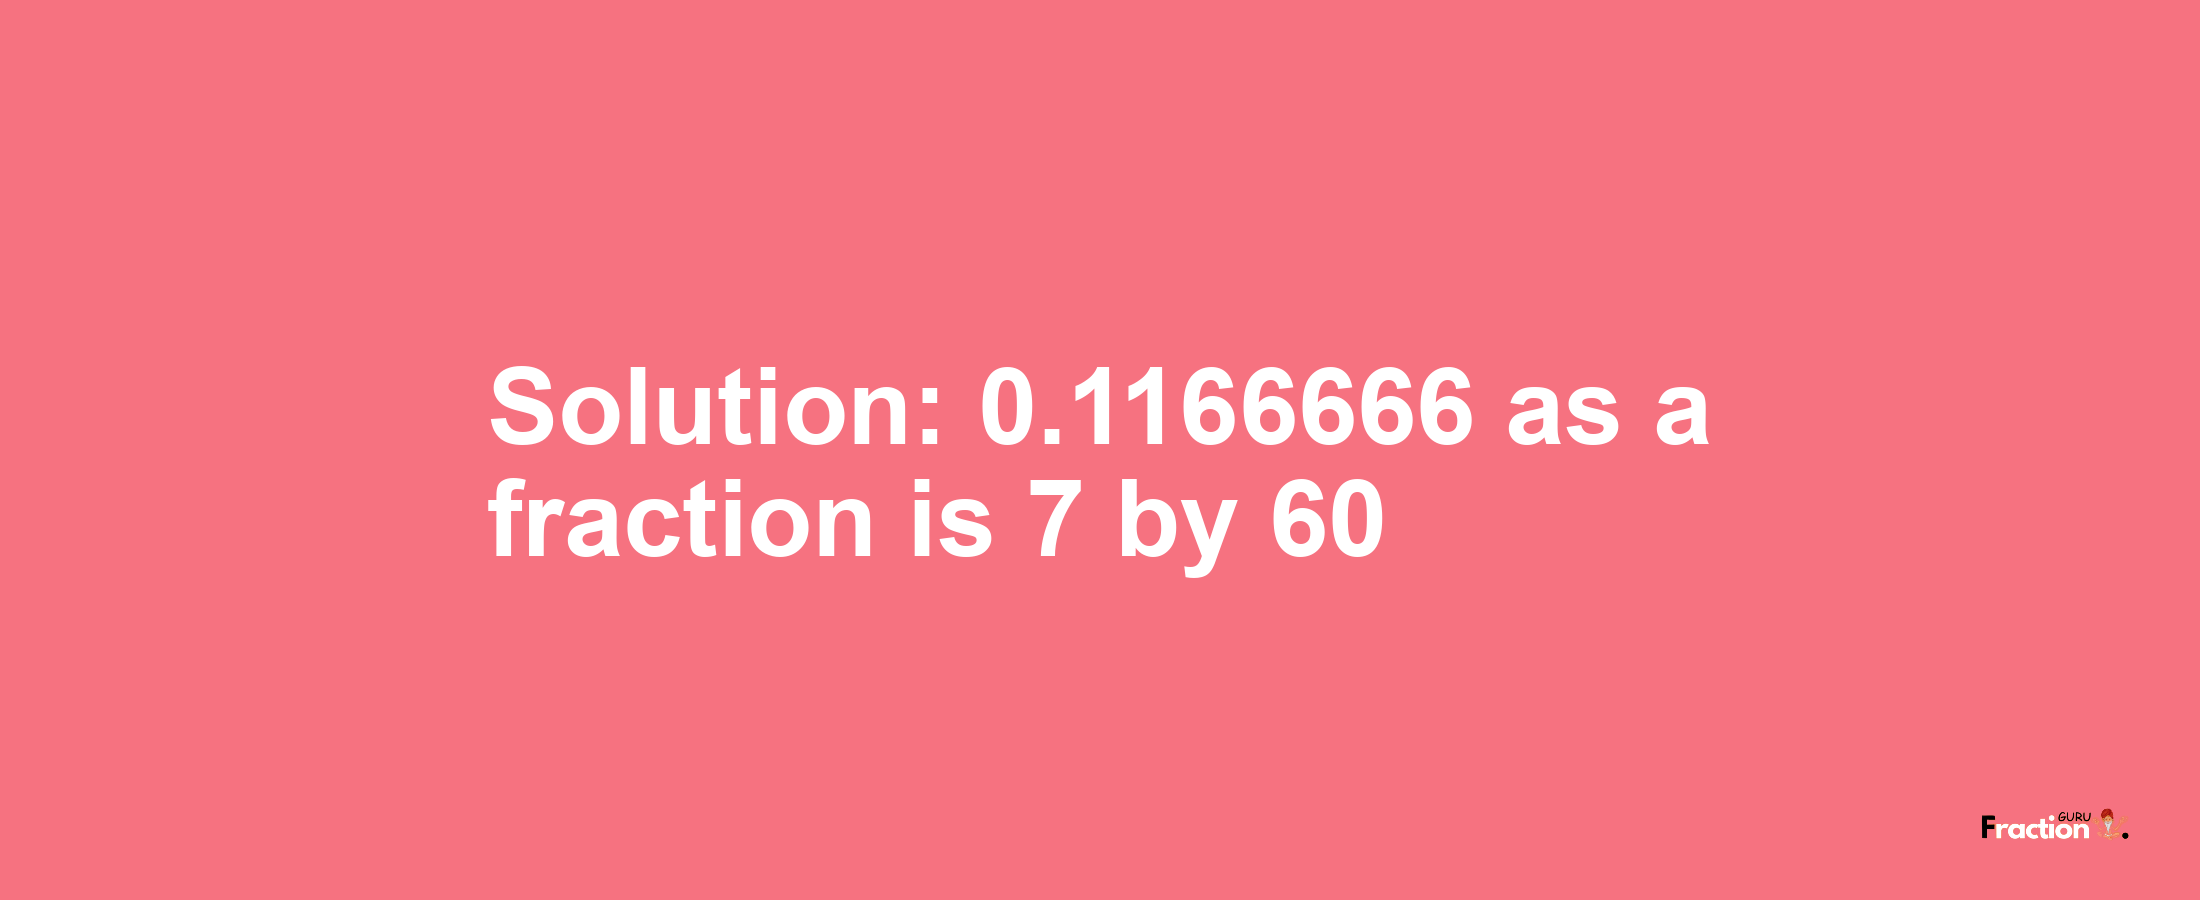 Solution:0.1166666 as a fraction is 7/60